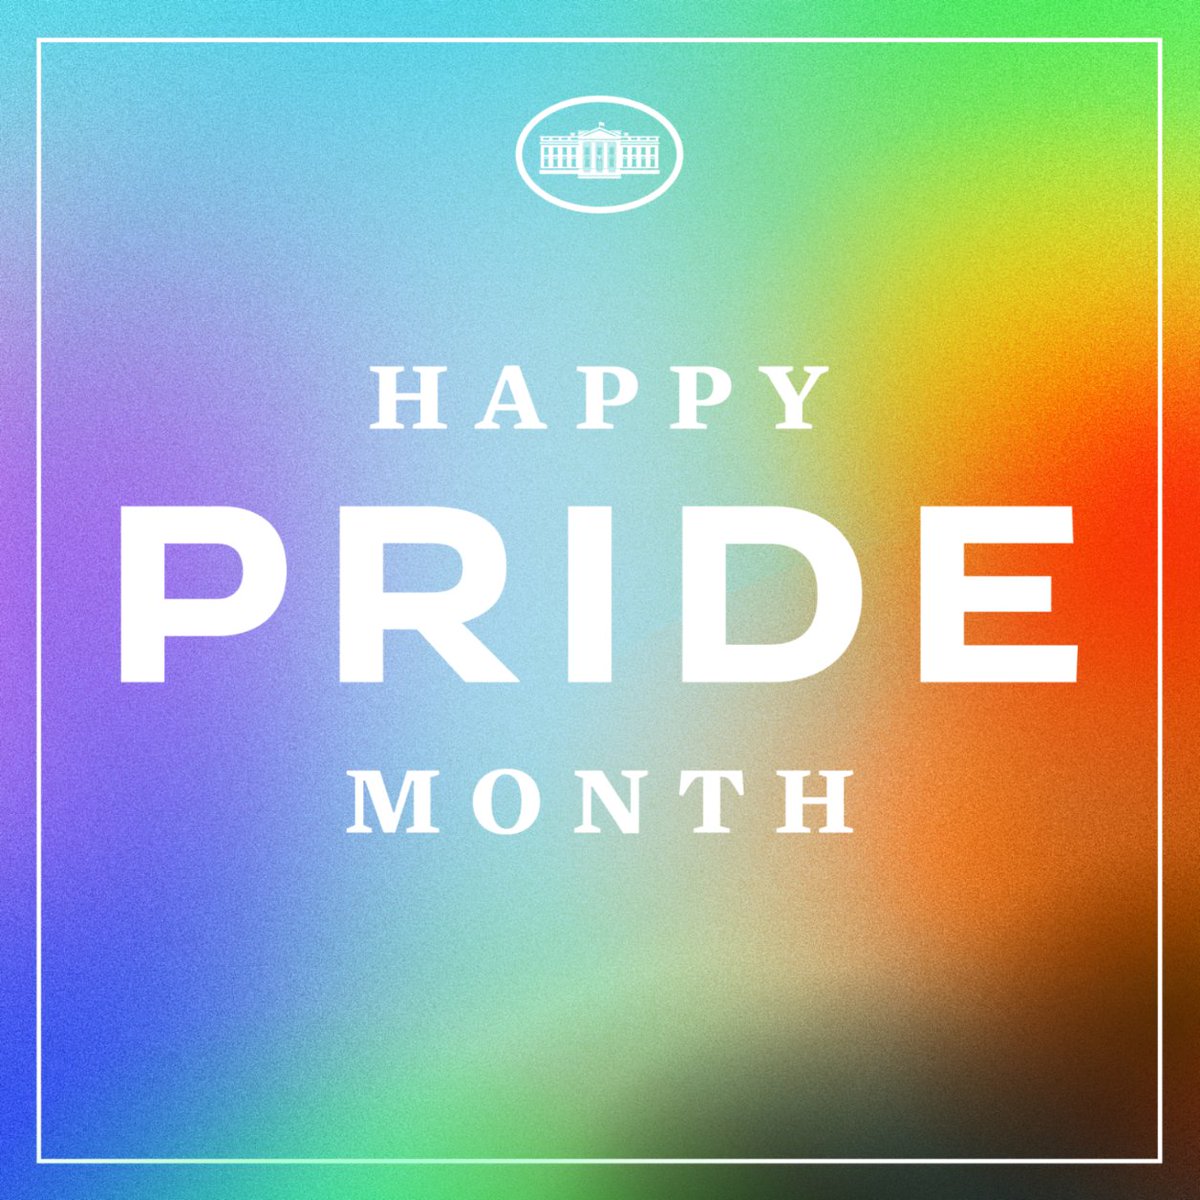 For generations, LGBTQI+ Americans have summoned the courage to live proudly – even when it meant putting their lives at risk. This Pride Month, we recommit to realizing the promise of America for all, to celebrating LGBTQI+ people, and to taking pride in the example they set.